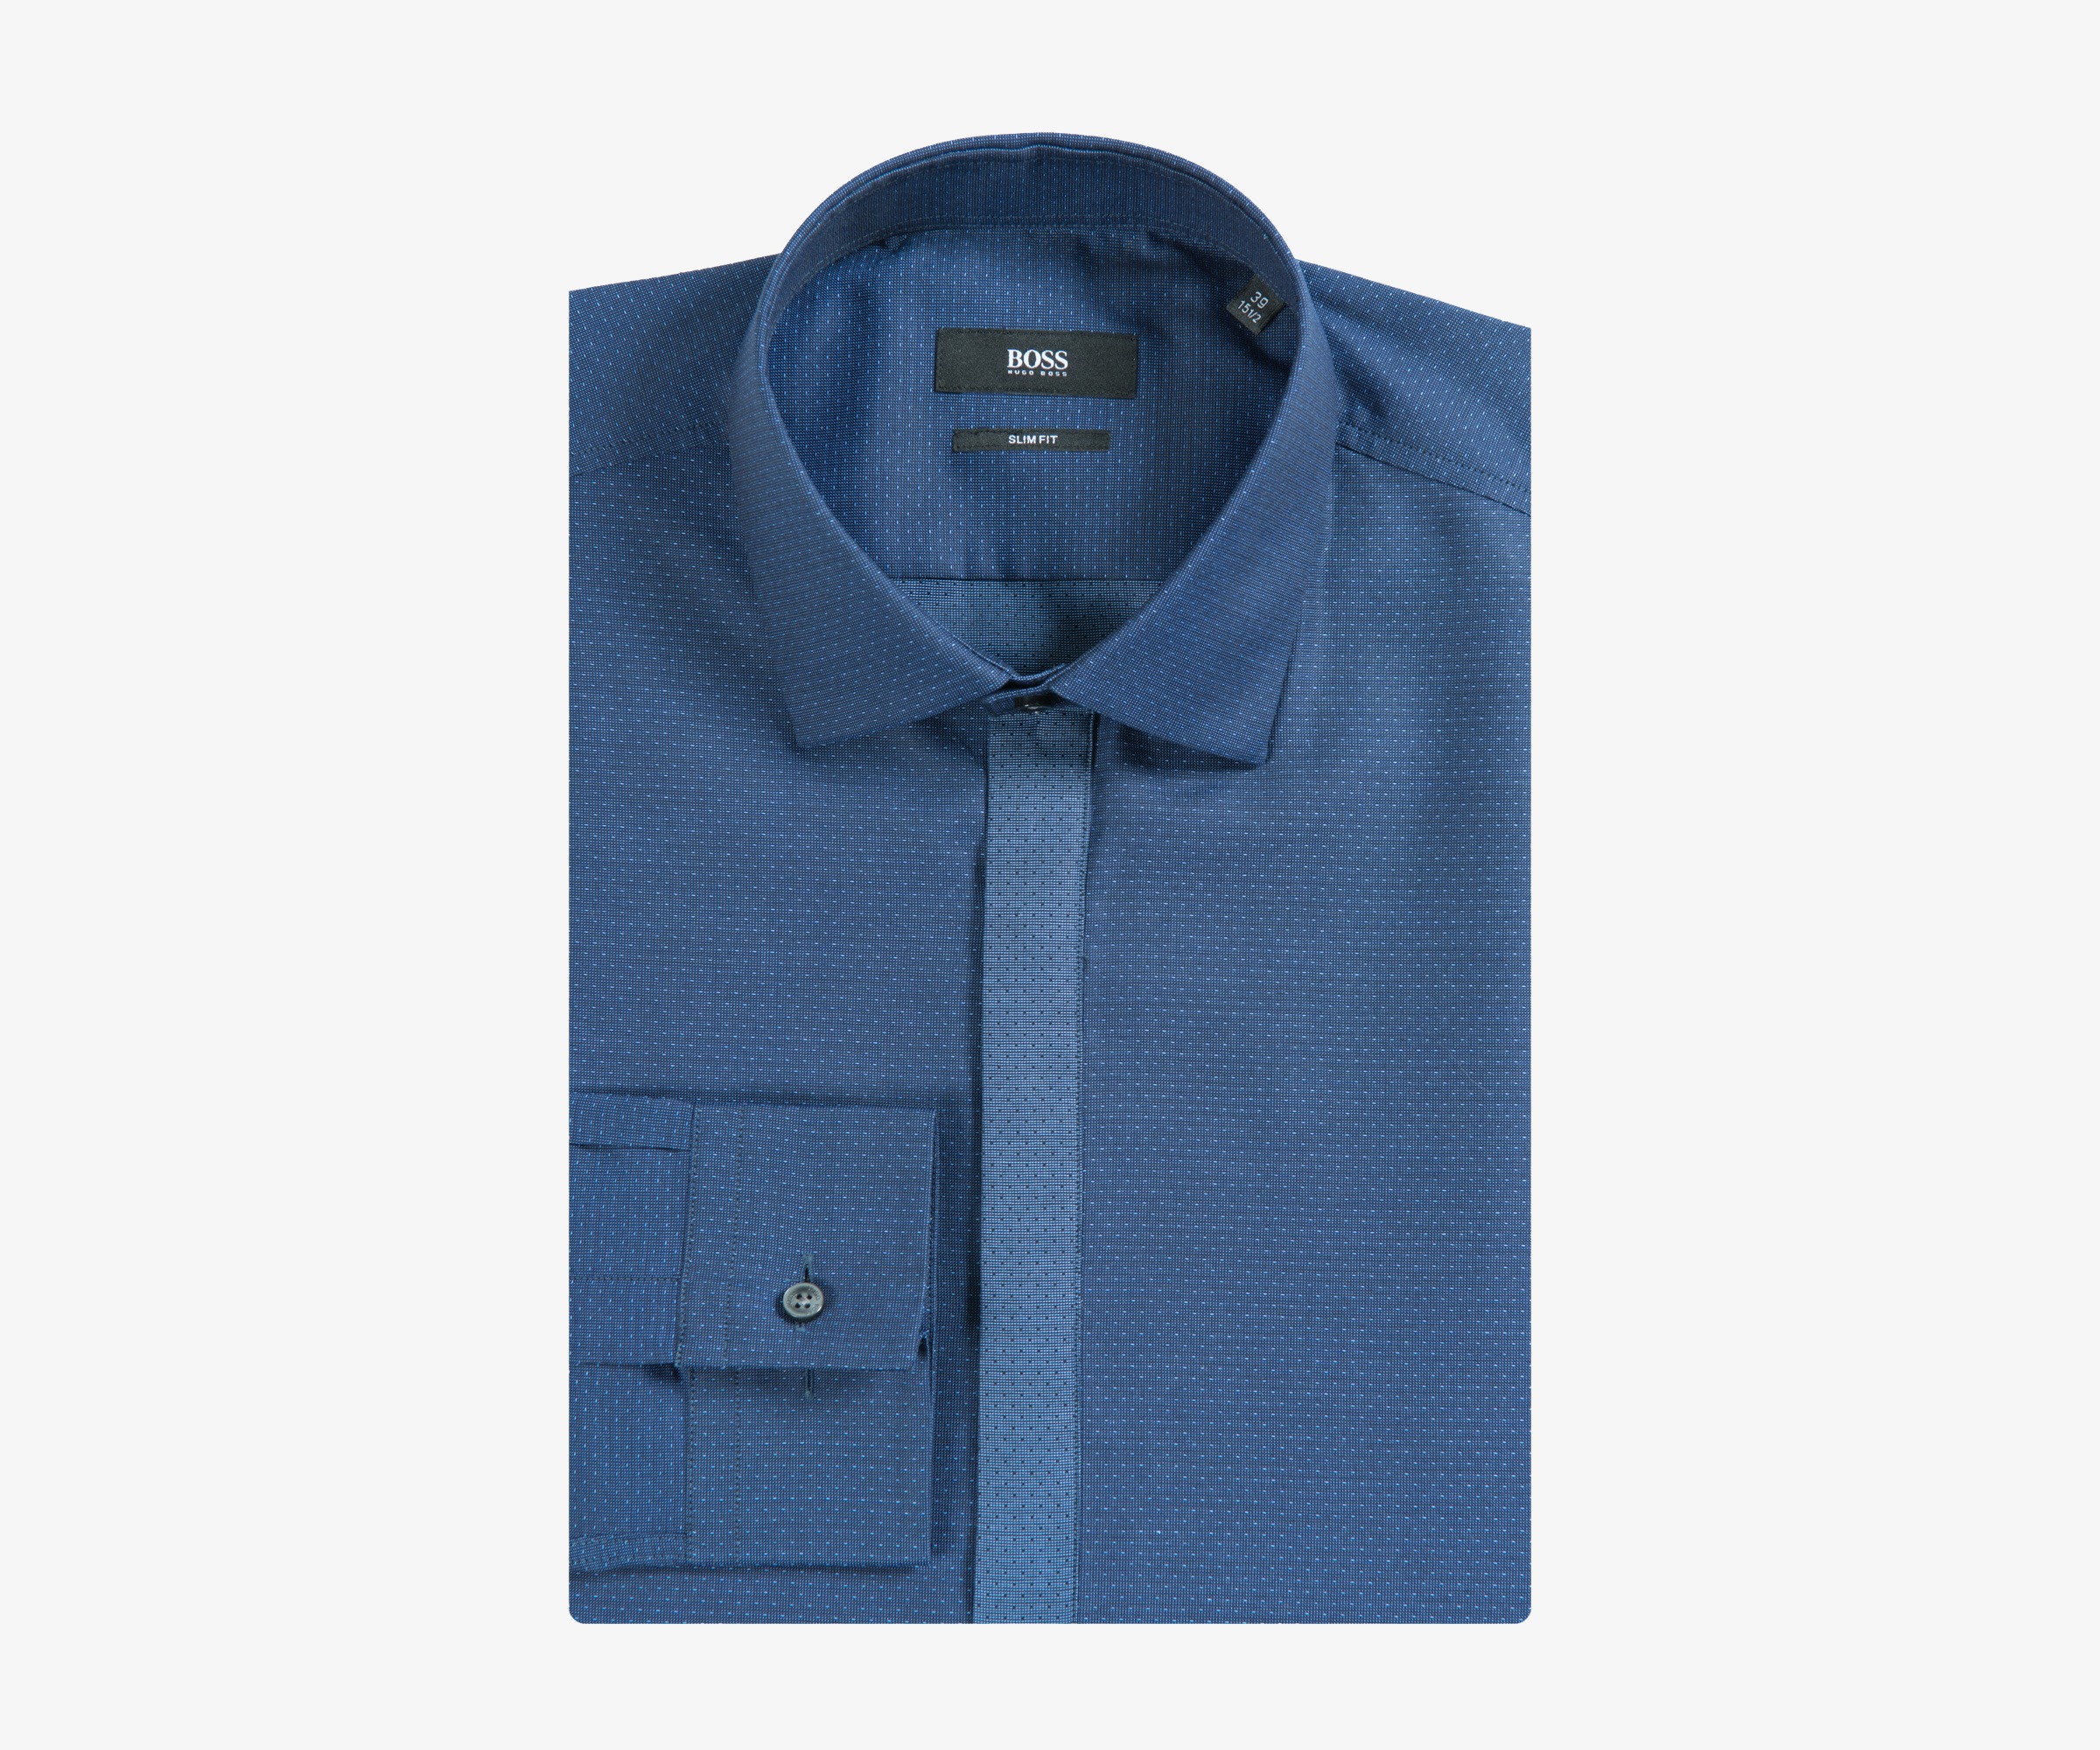 Hugo Boss ’Icarus’ Spotted Shirt Navy